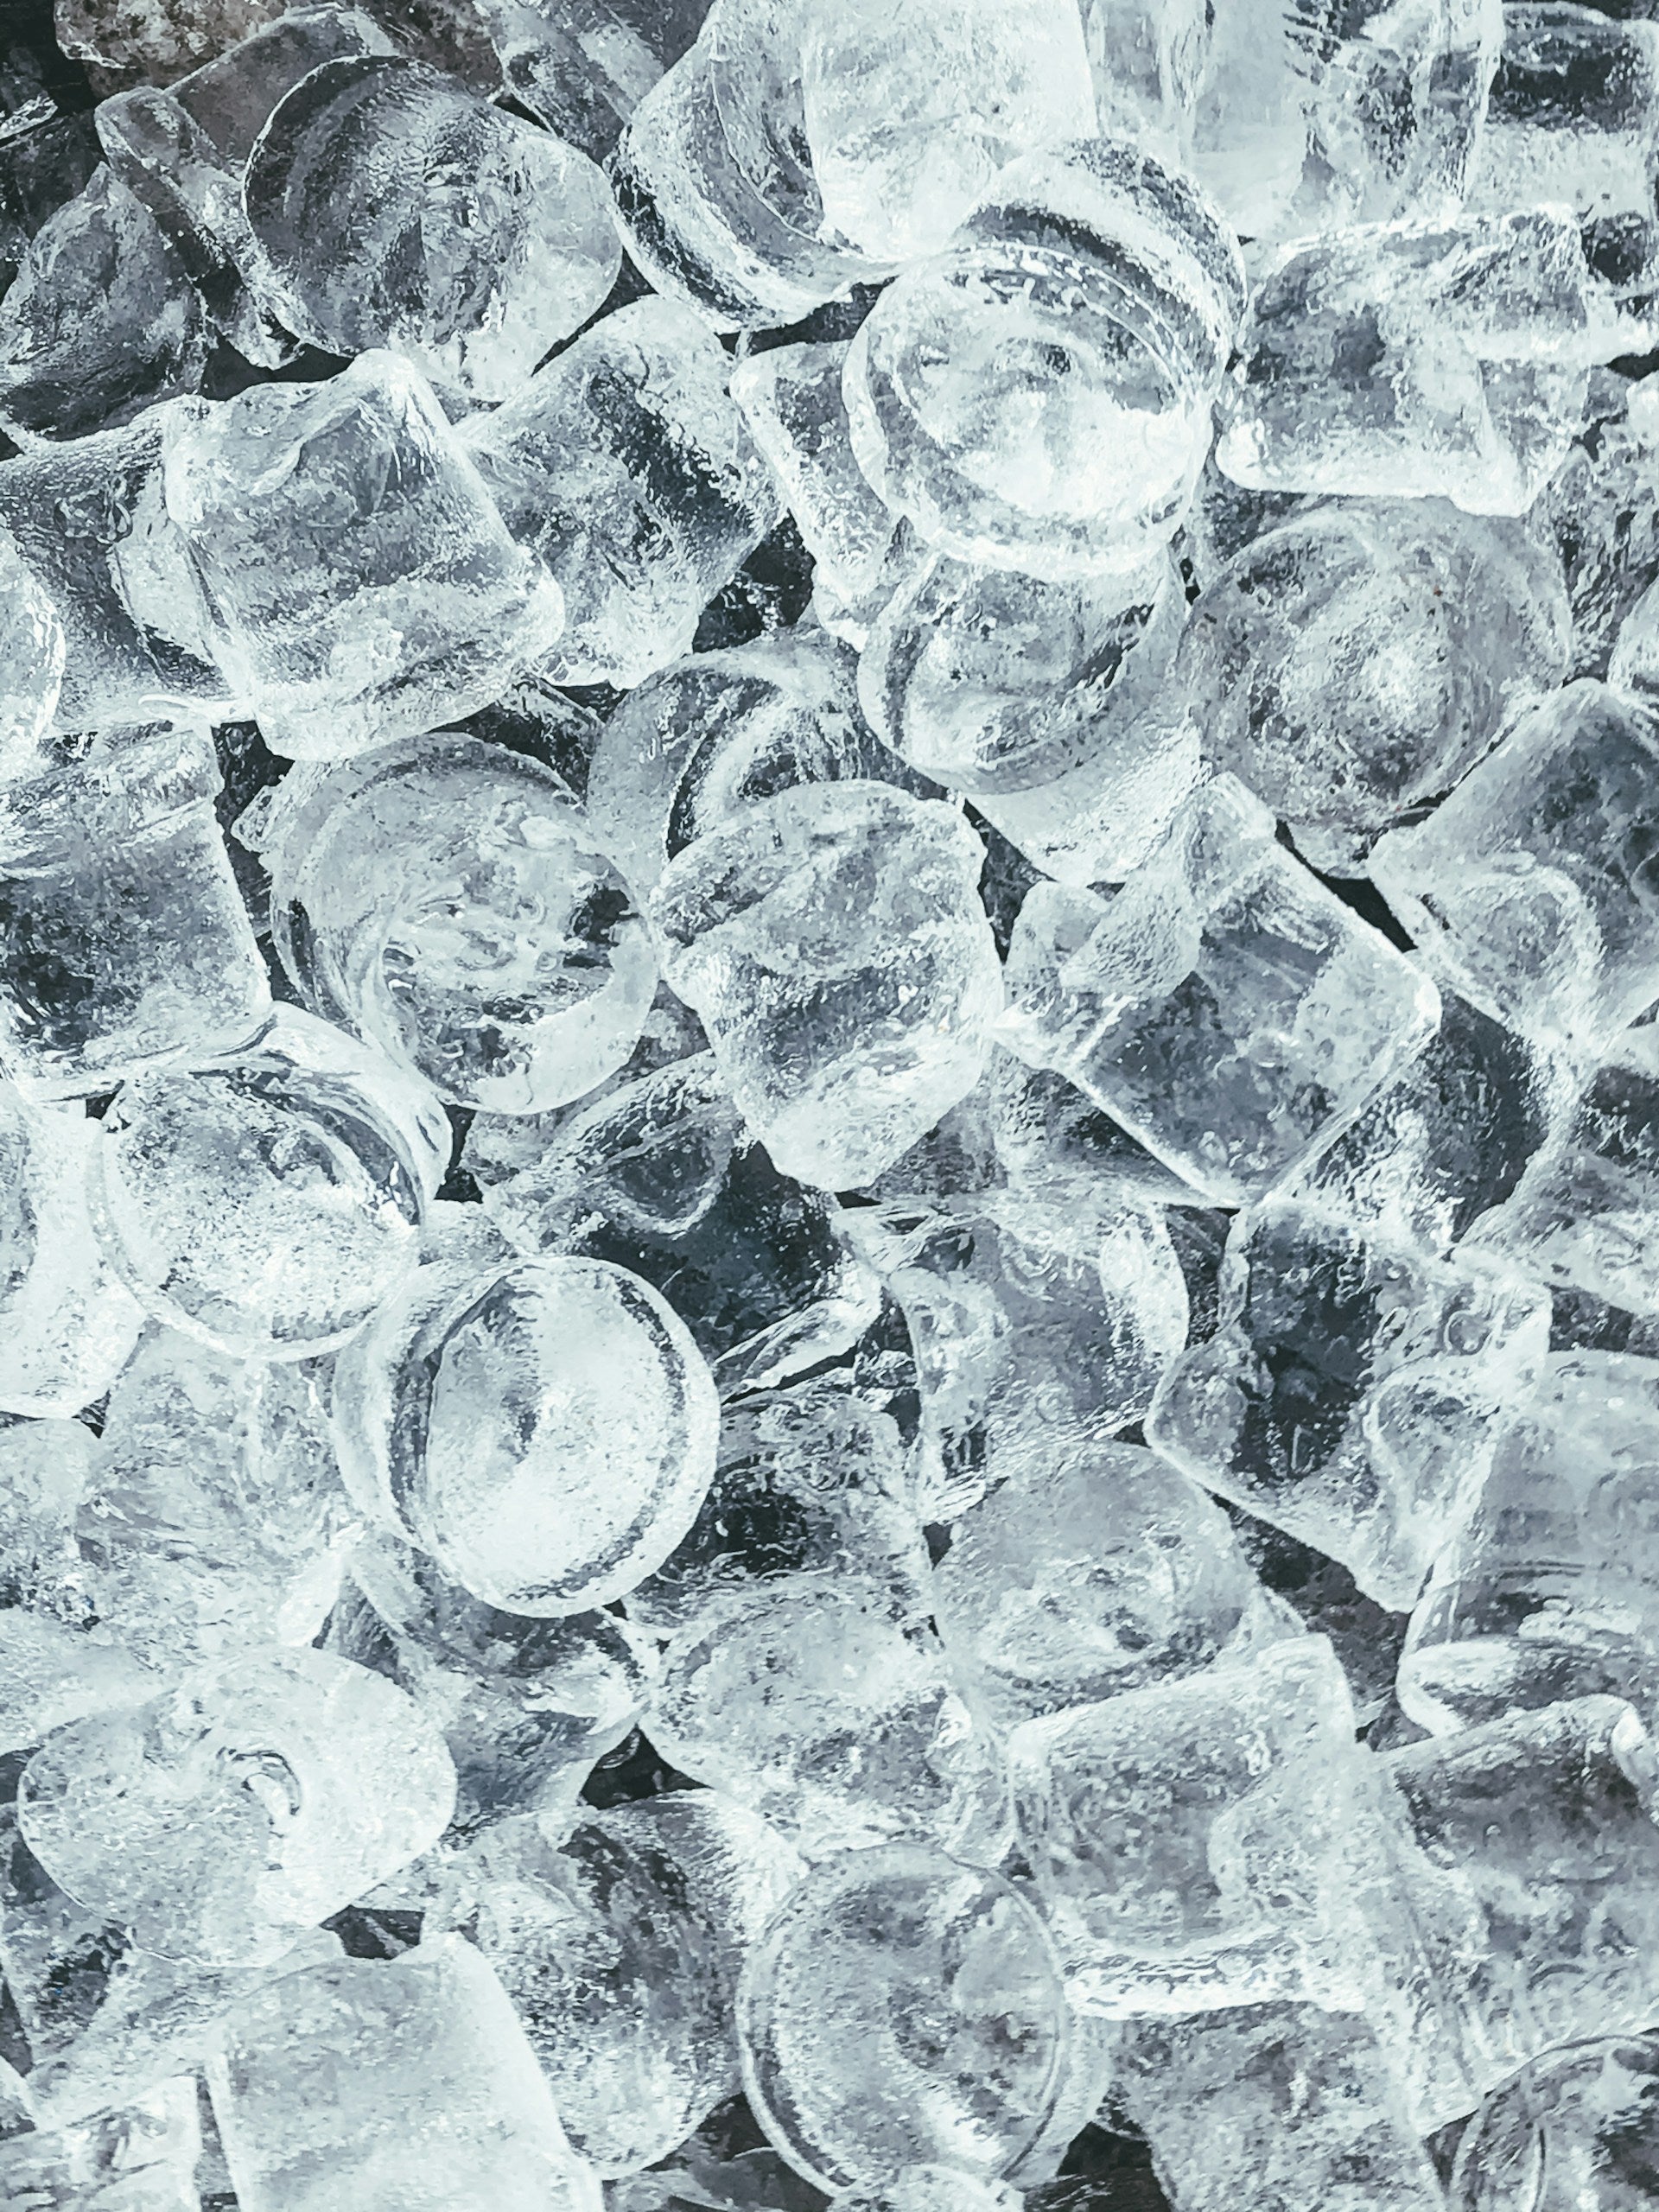 How Long Does It Take For A New Fridge To Make Ice? | Fridge.com